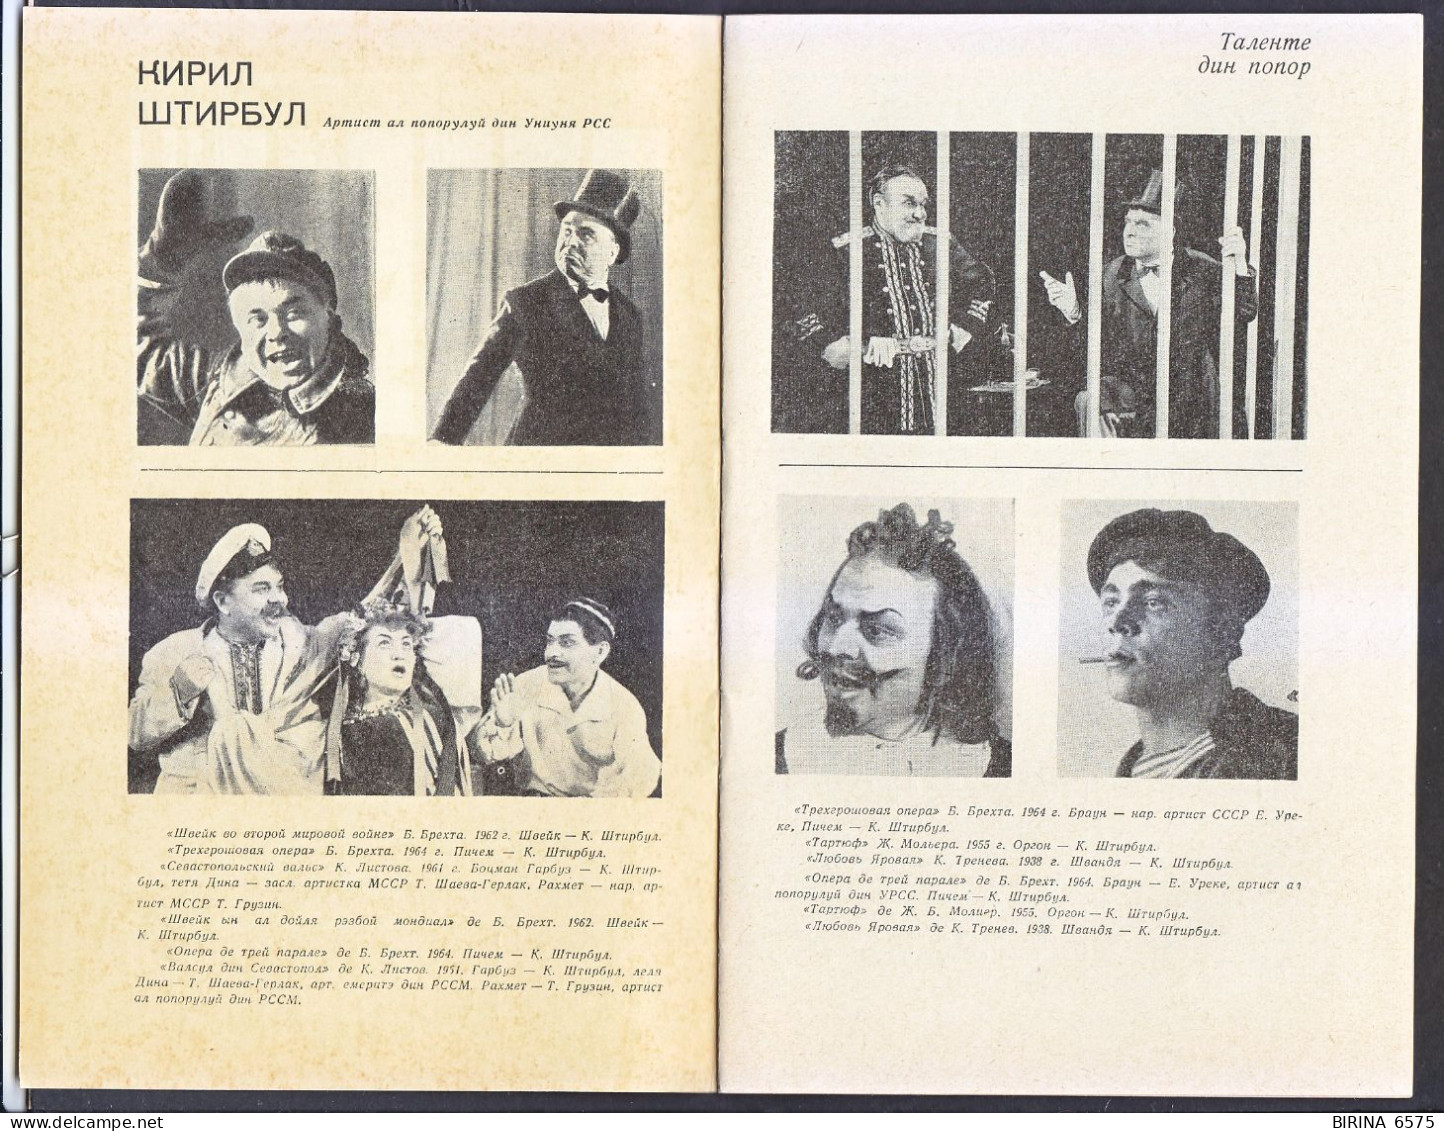 BROCHURE. PEOPLE'S ARTIST OF THE USSR. K. STIRBUL. CHISINAU. IN RUSSIAN AND MOLDOVAN. - 7-29-i - Teatro